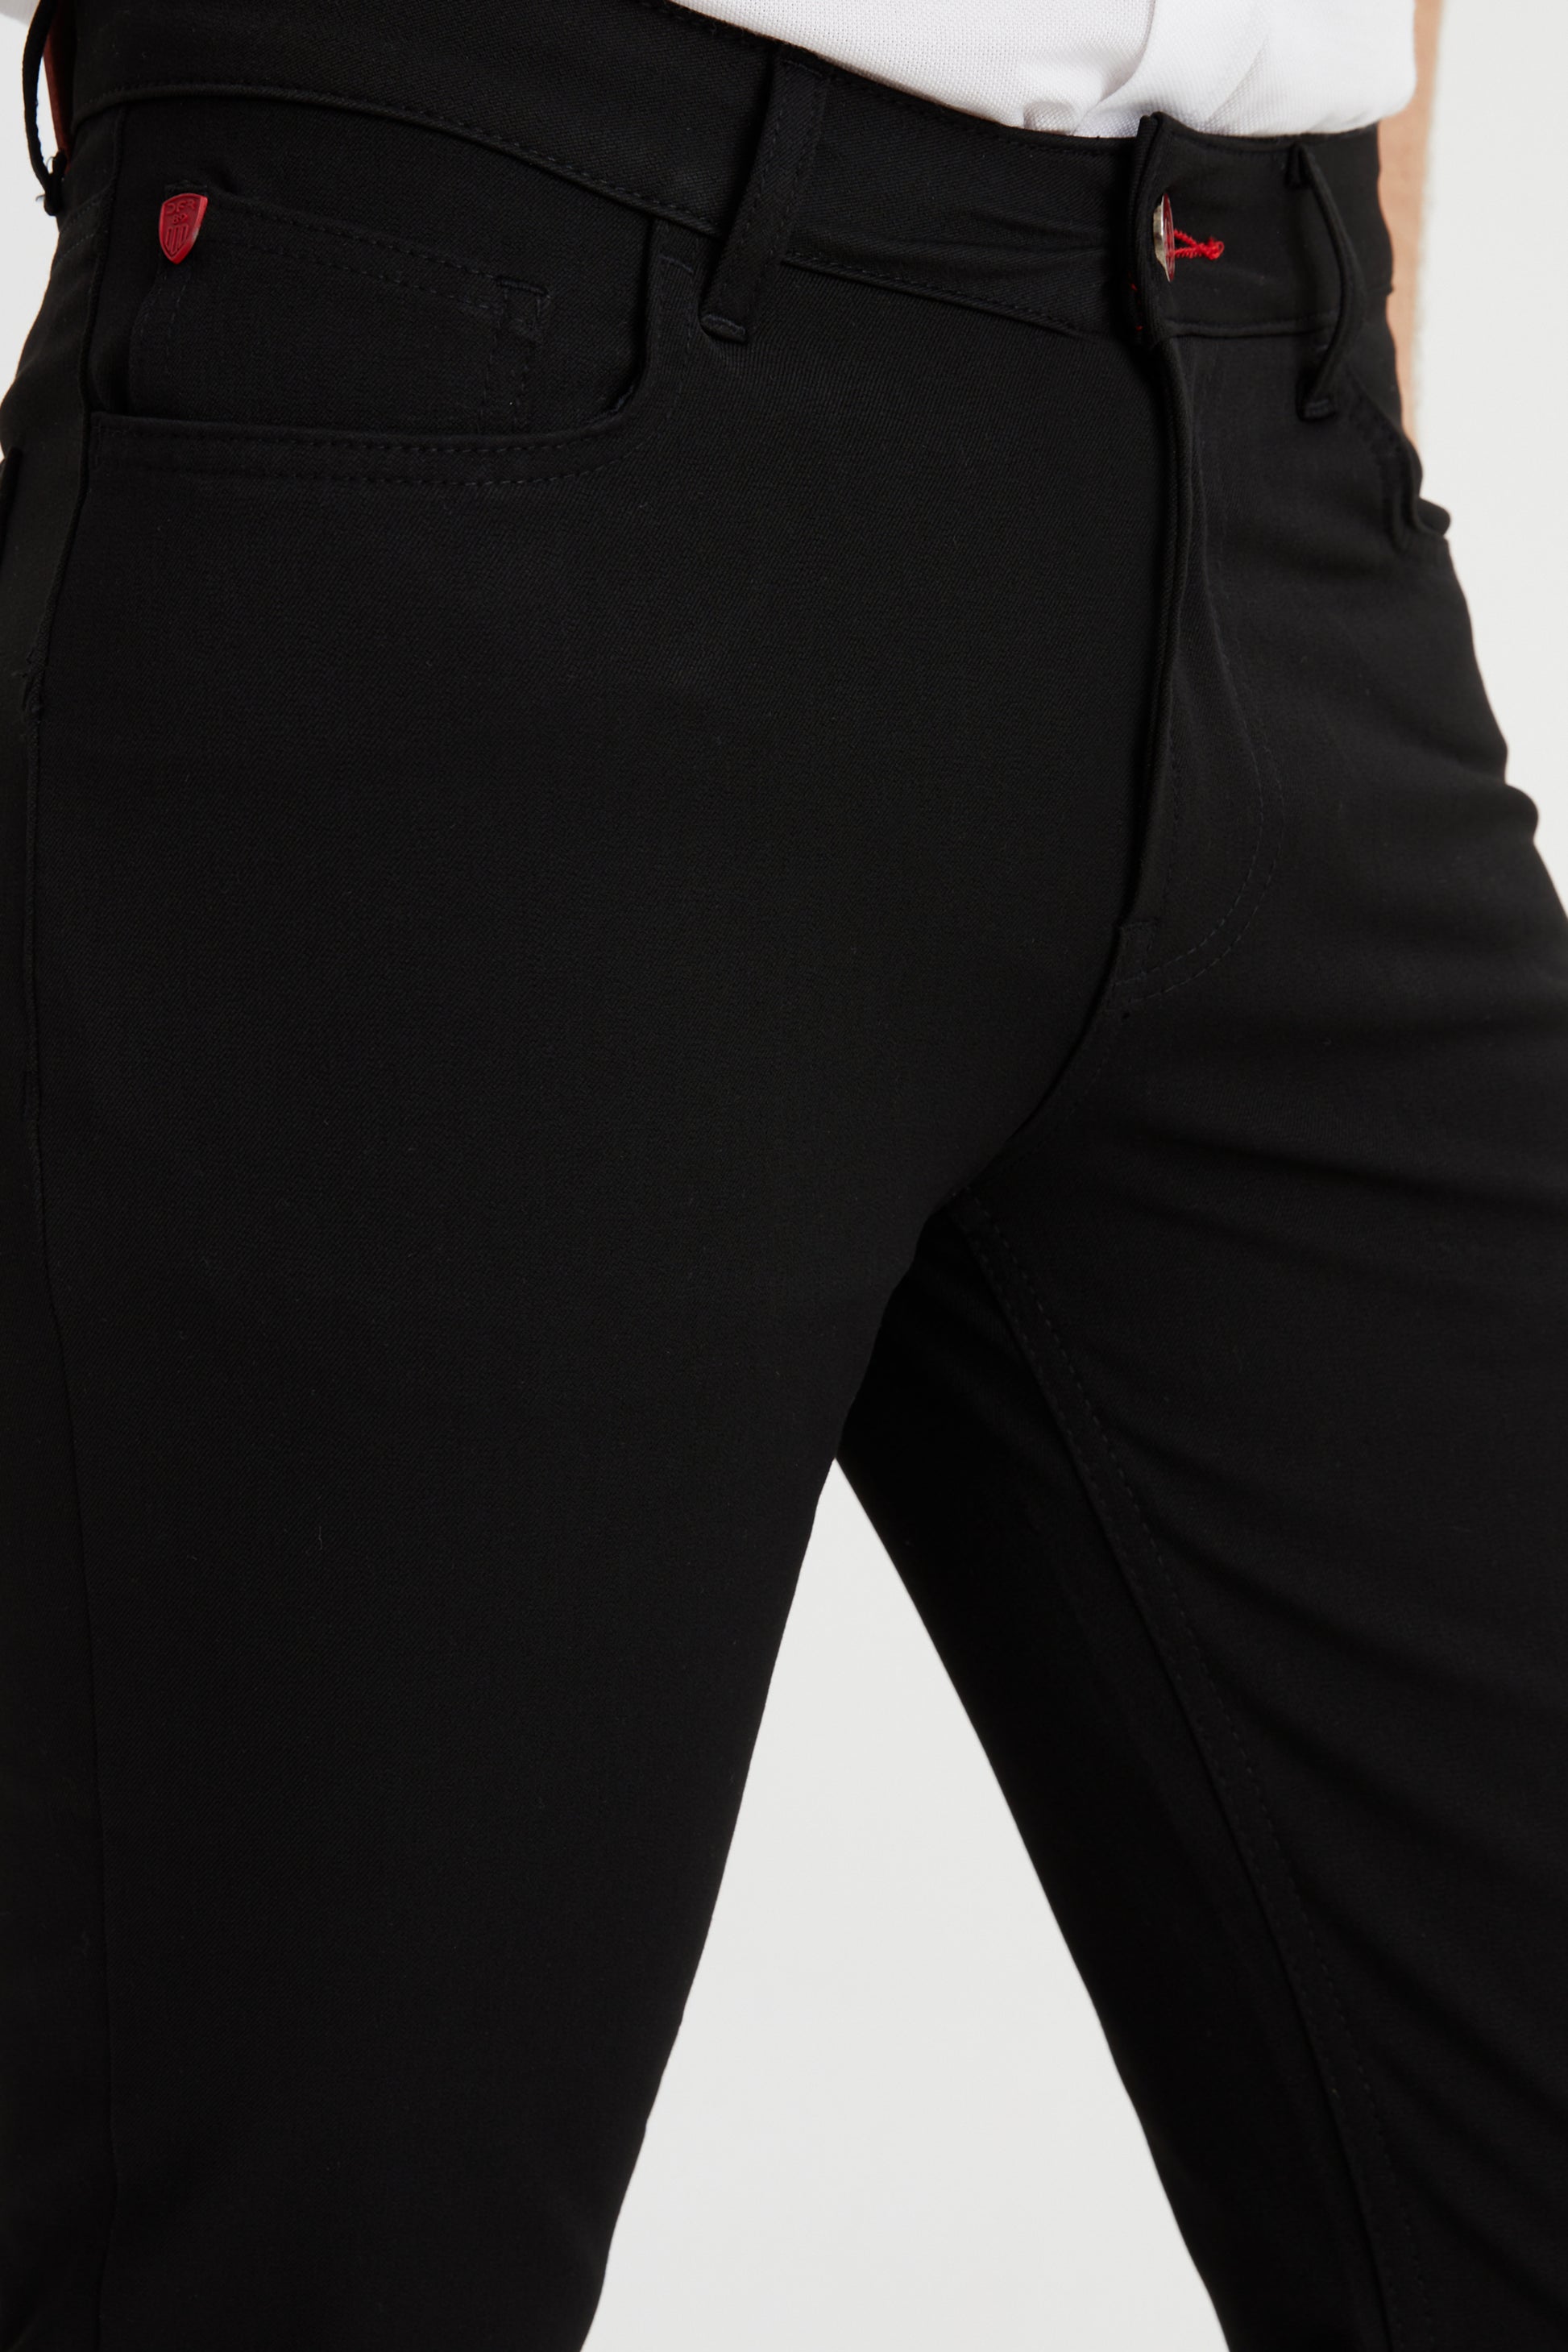 DFR89 men's slim black dress pants. Wrinkle resistant and stretchy, for the ultimate combination of style and comfort.